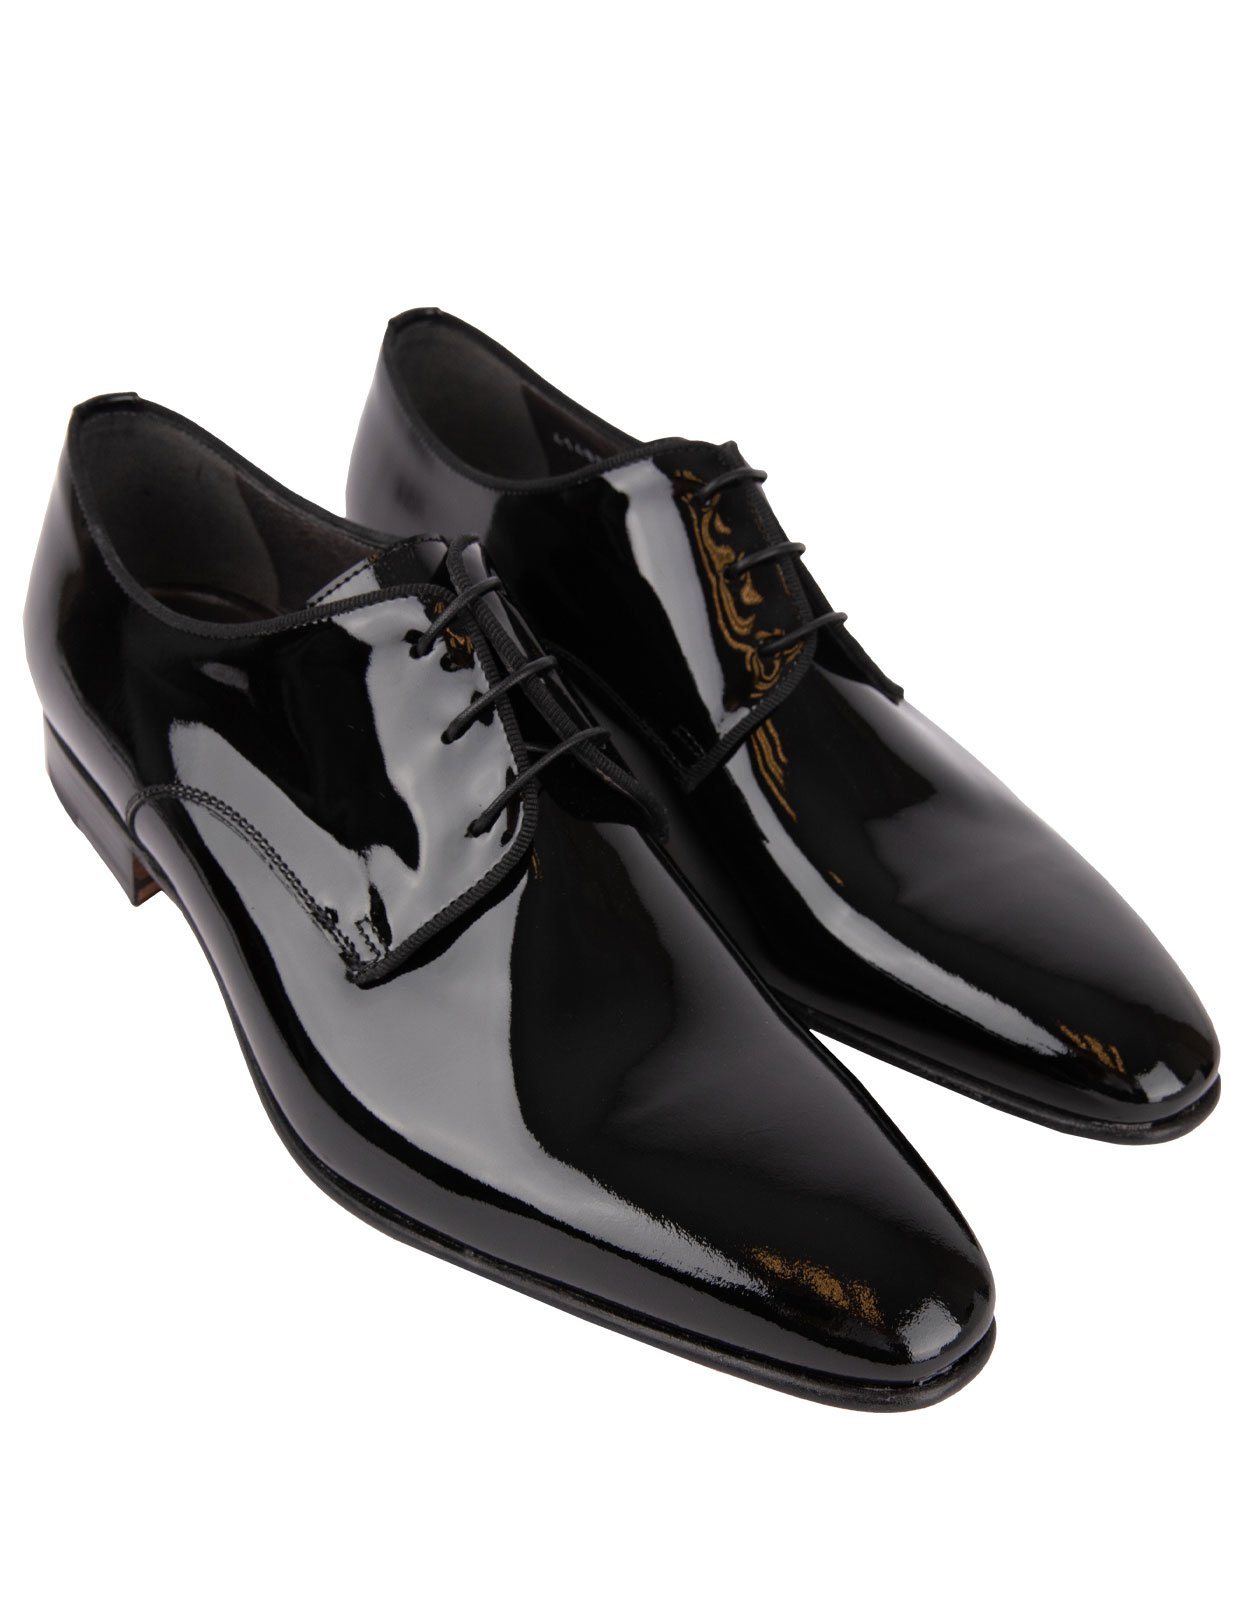 Lille Patent Leather Derby Shoes Black Stl 6.5